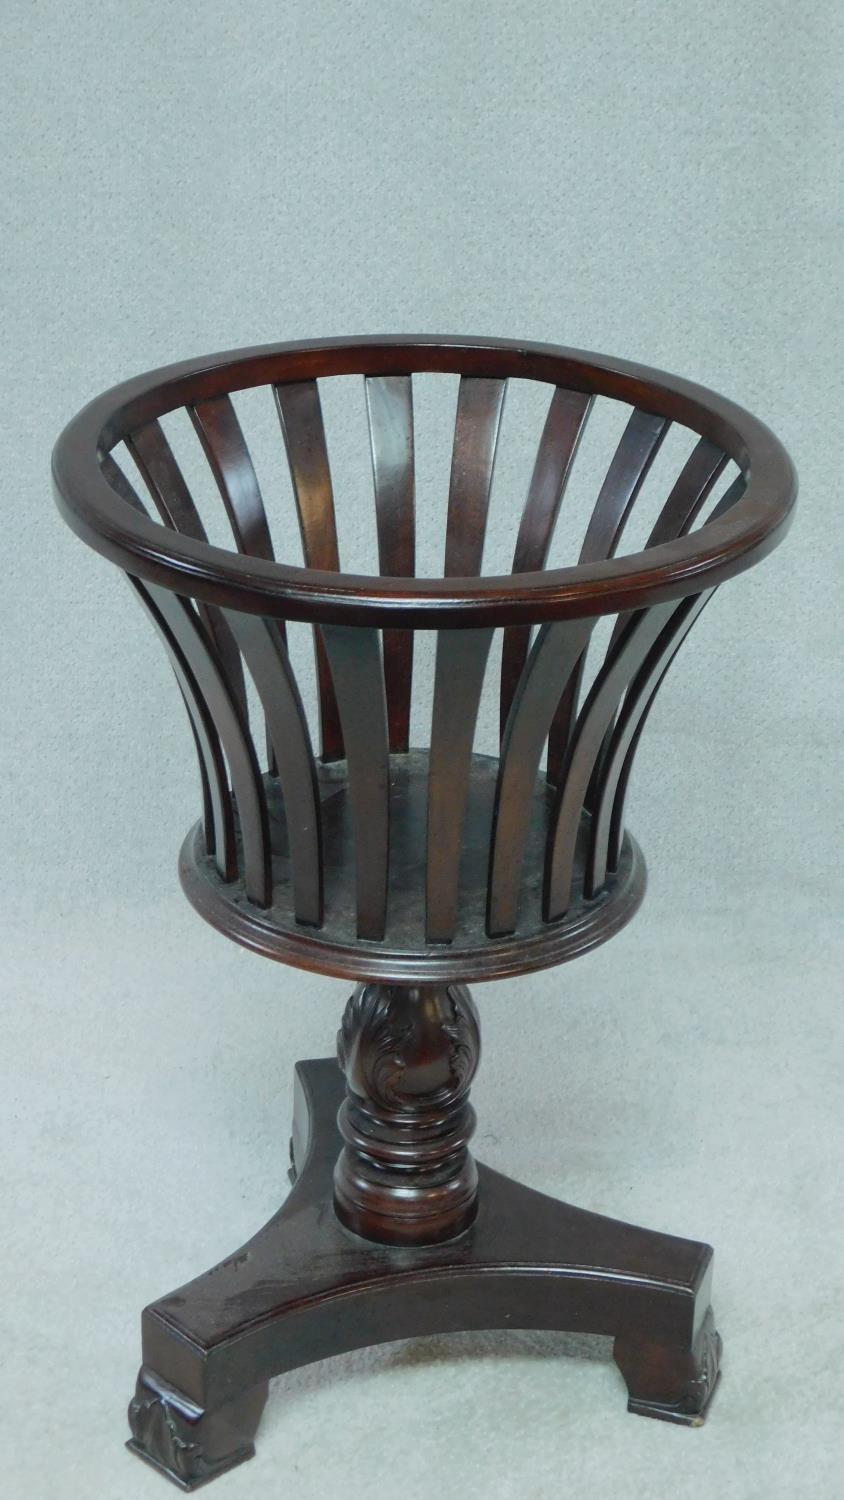 A 19th century style teak jardiniere stand with shaped slatted sides on carved tripod platform base.